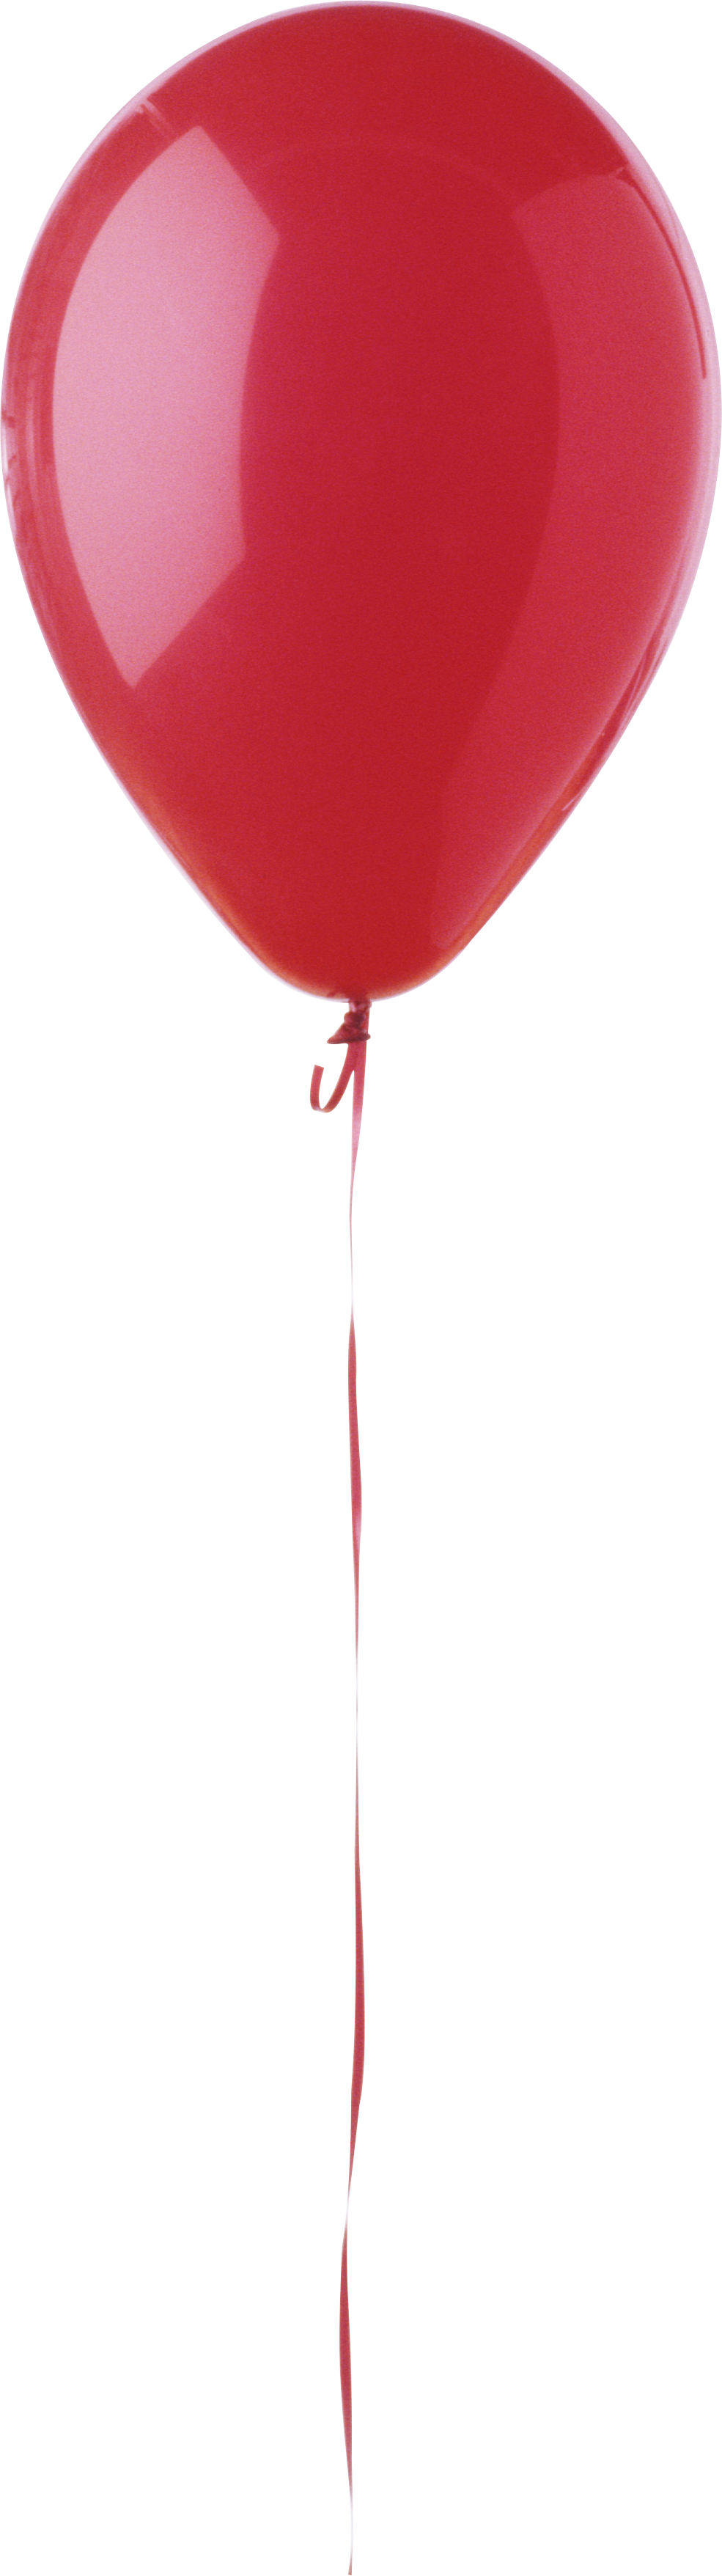 Balloon Red PNG Image